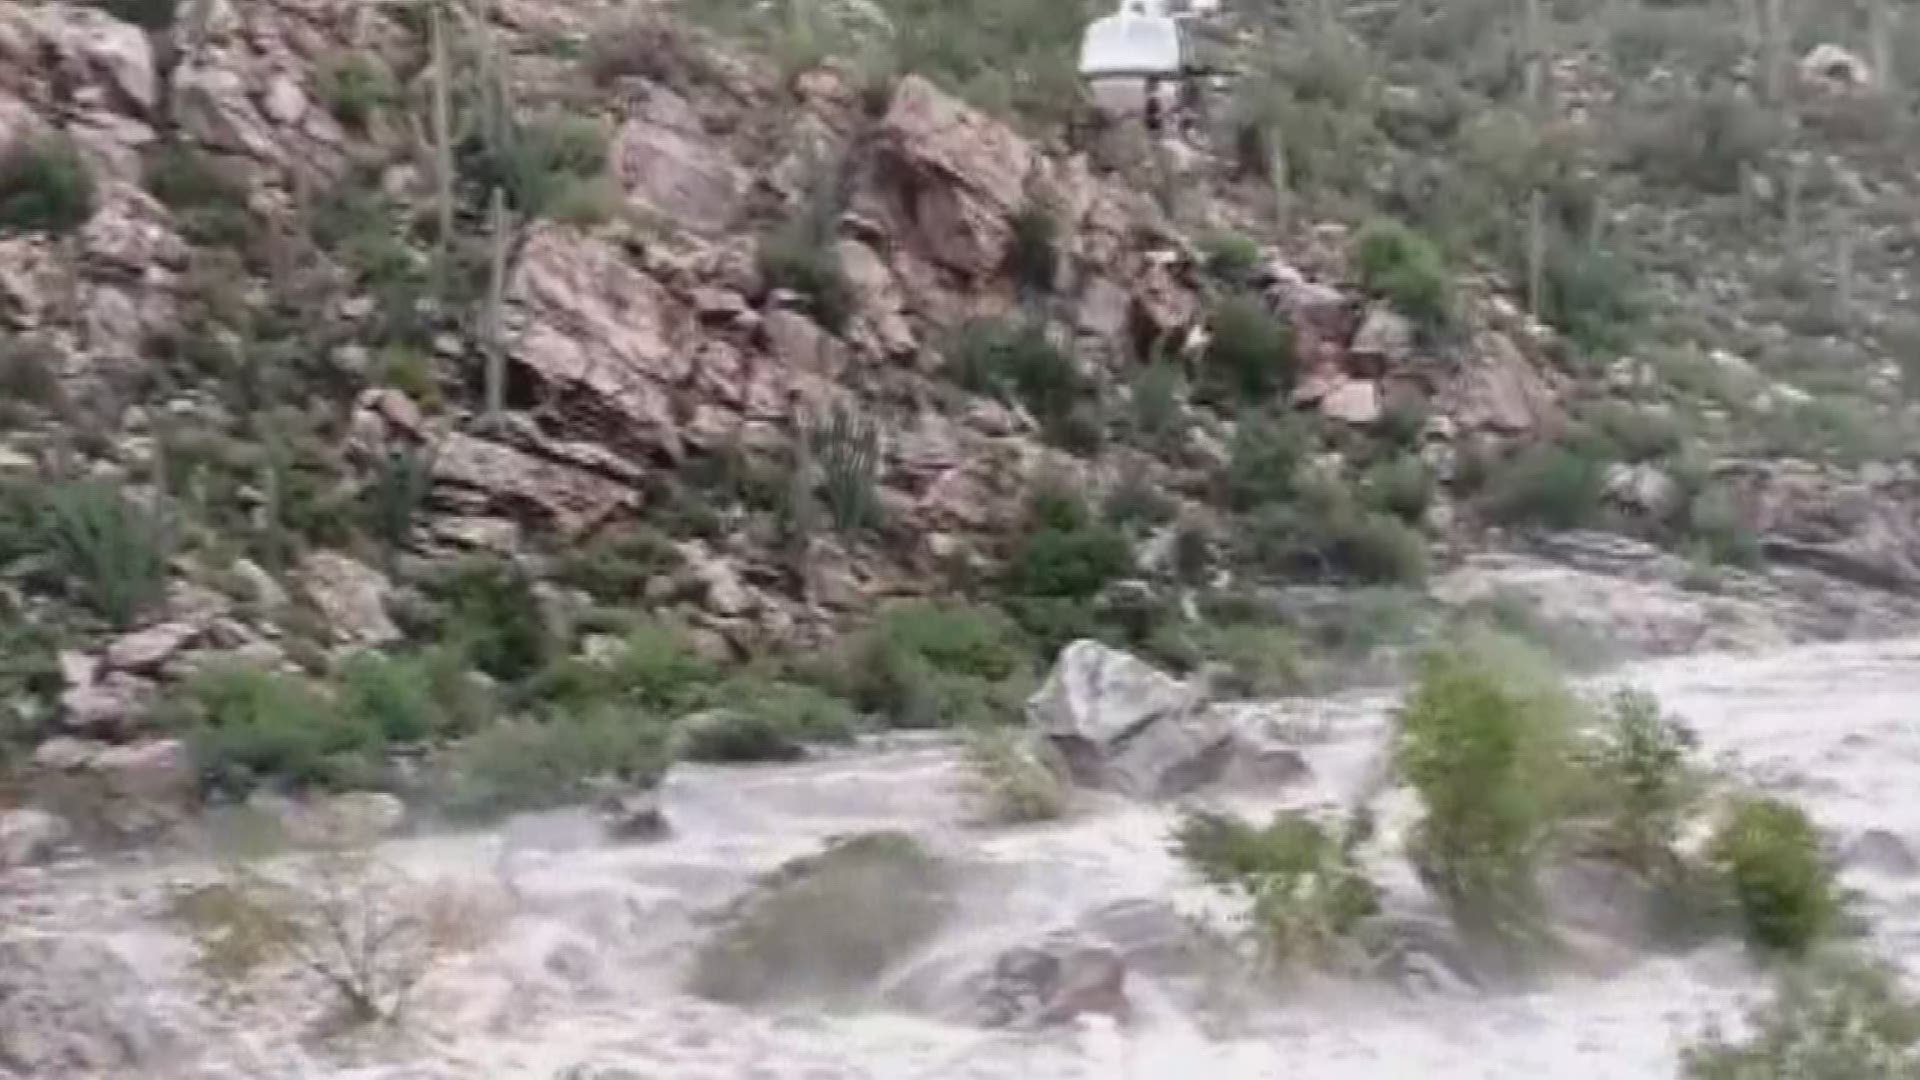 Flash flooding stranded 17 hikers, including a 4-year-old child.